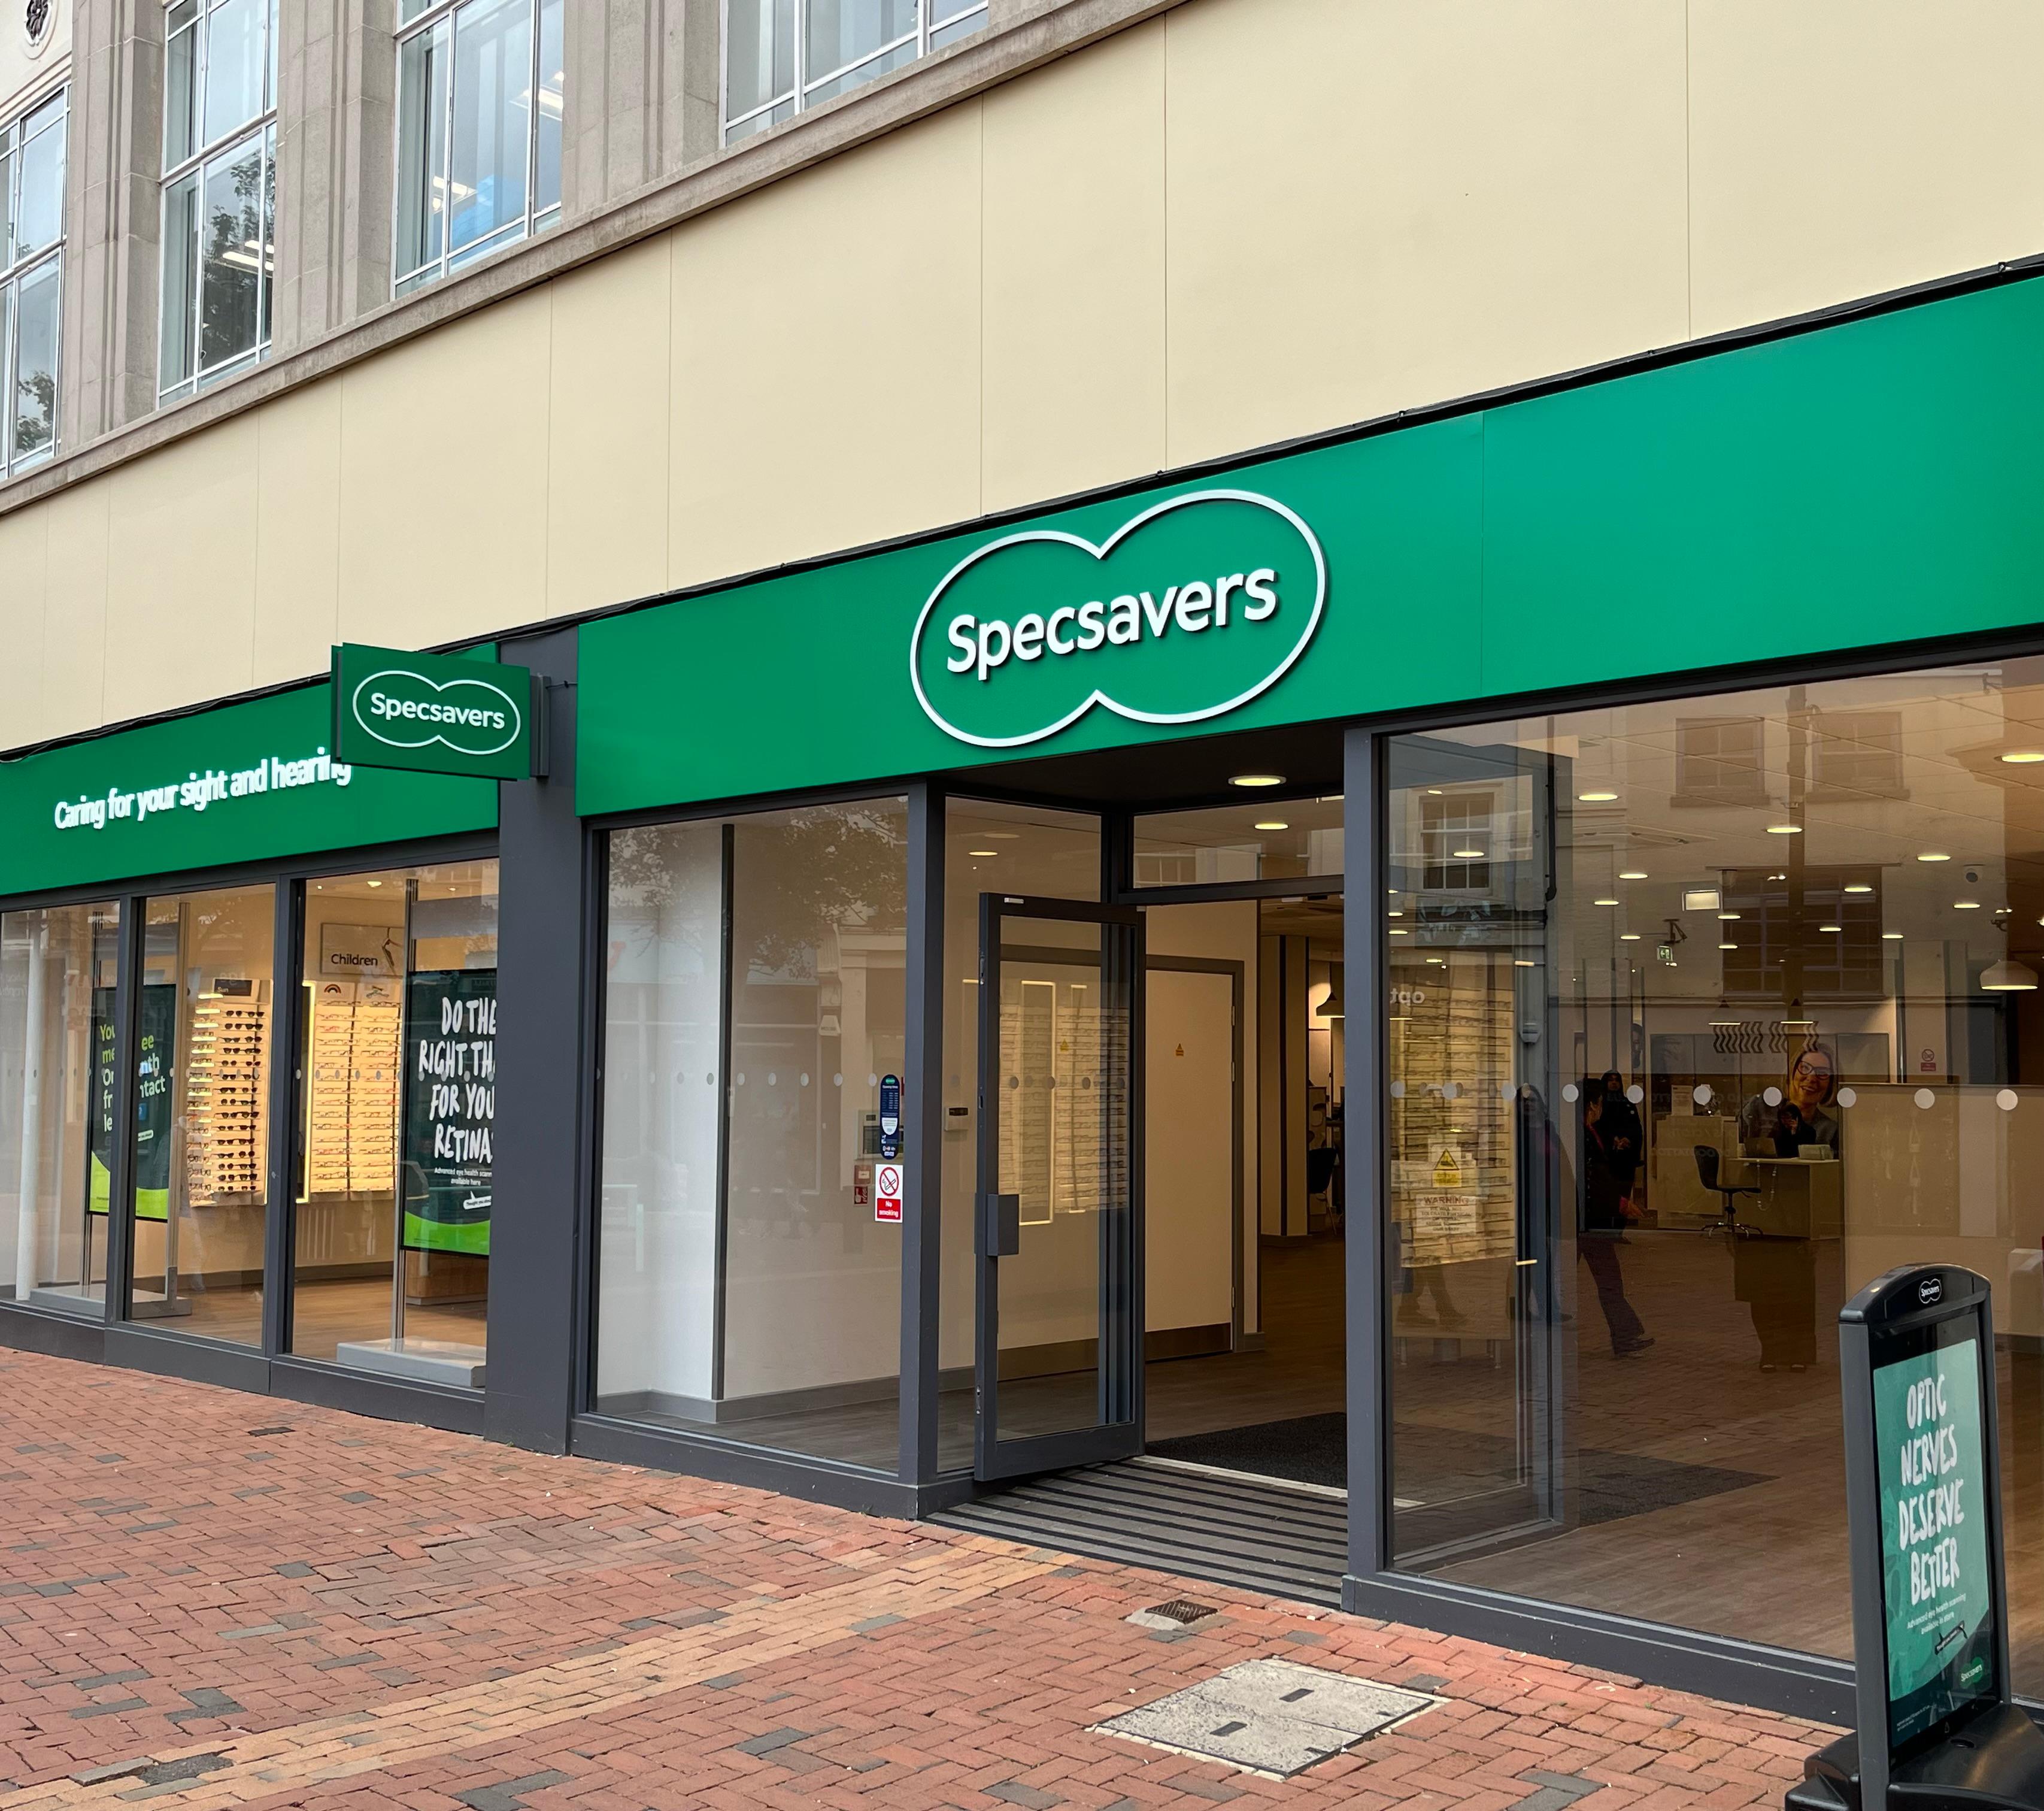 Specsavers Rugby Specsavers Opticians and Audiologists - Rugby Rugby 01788 540703